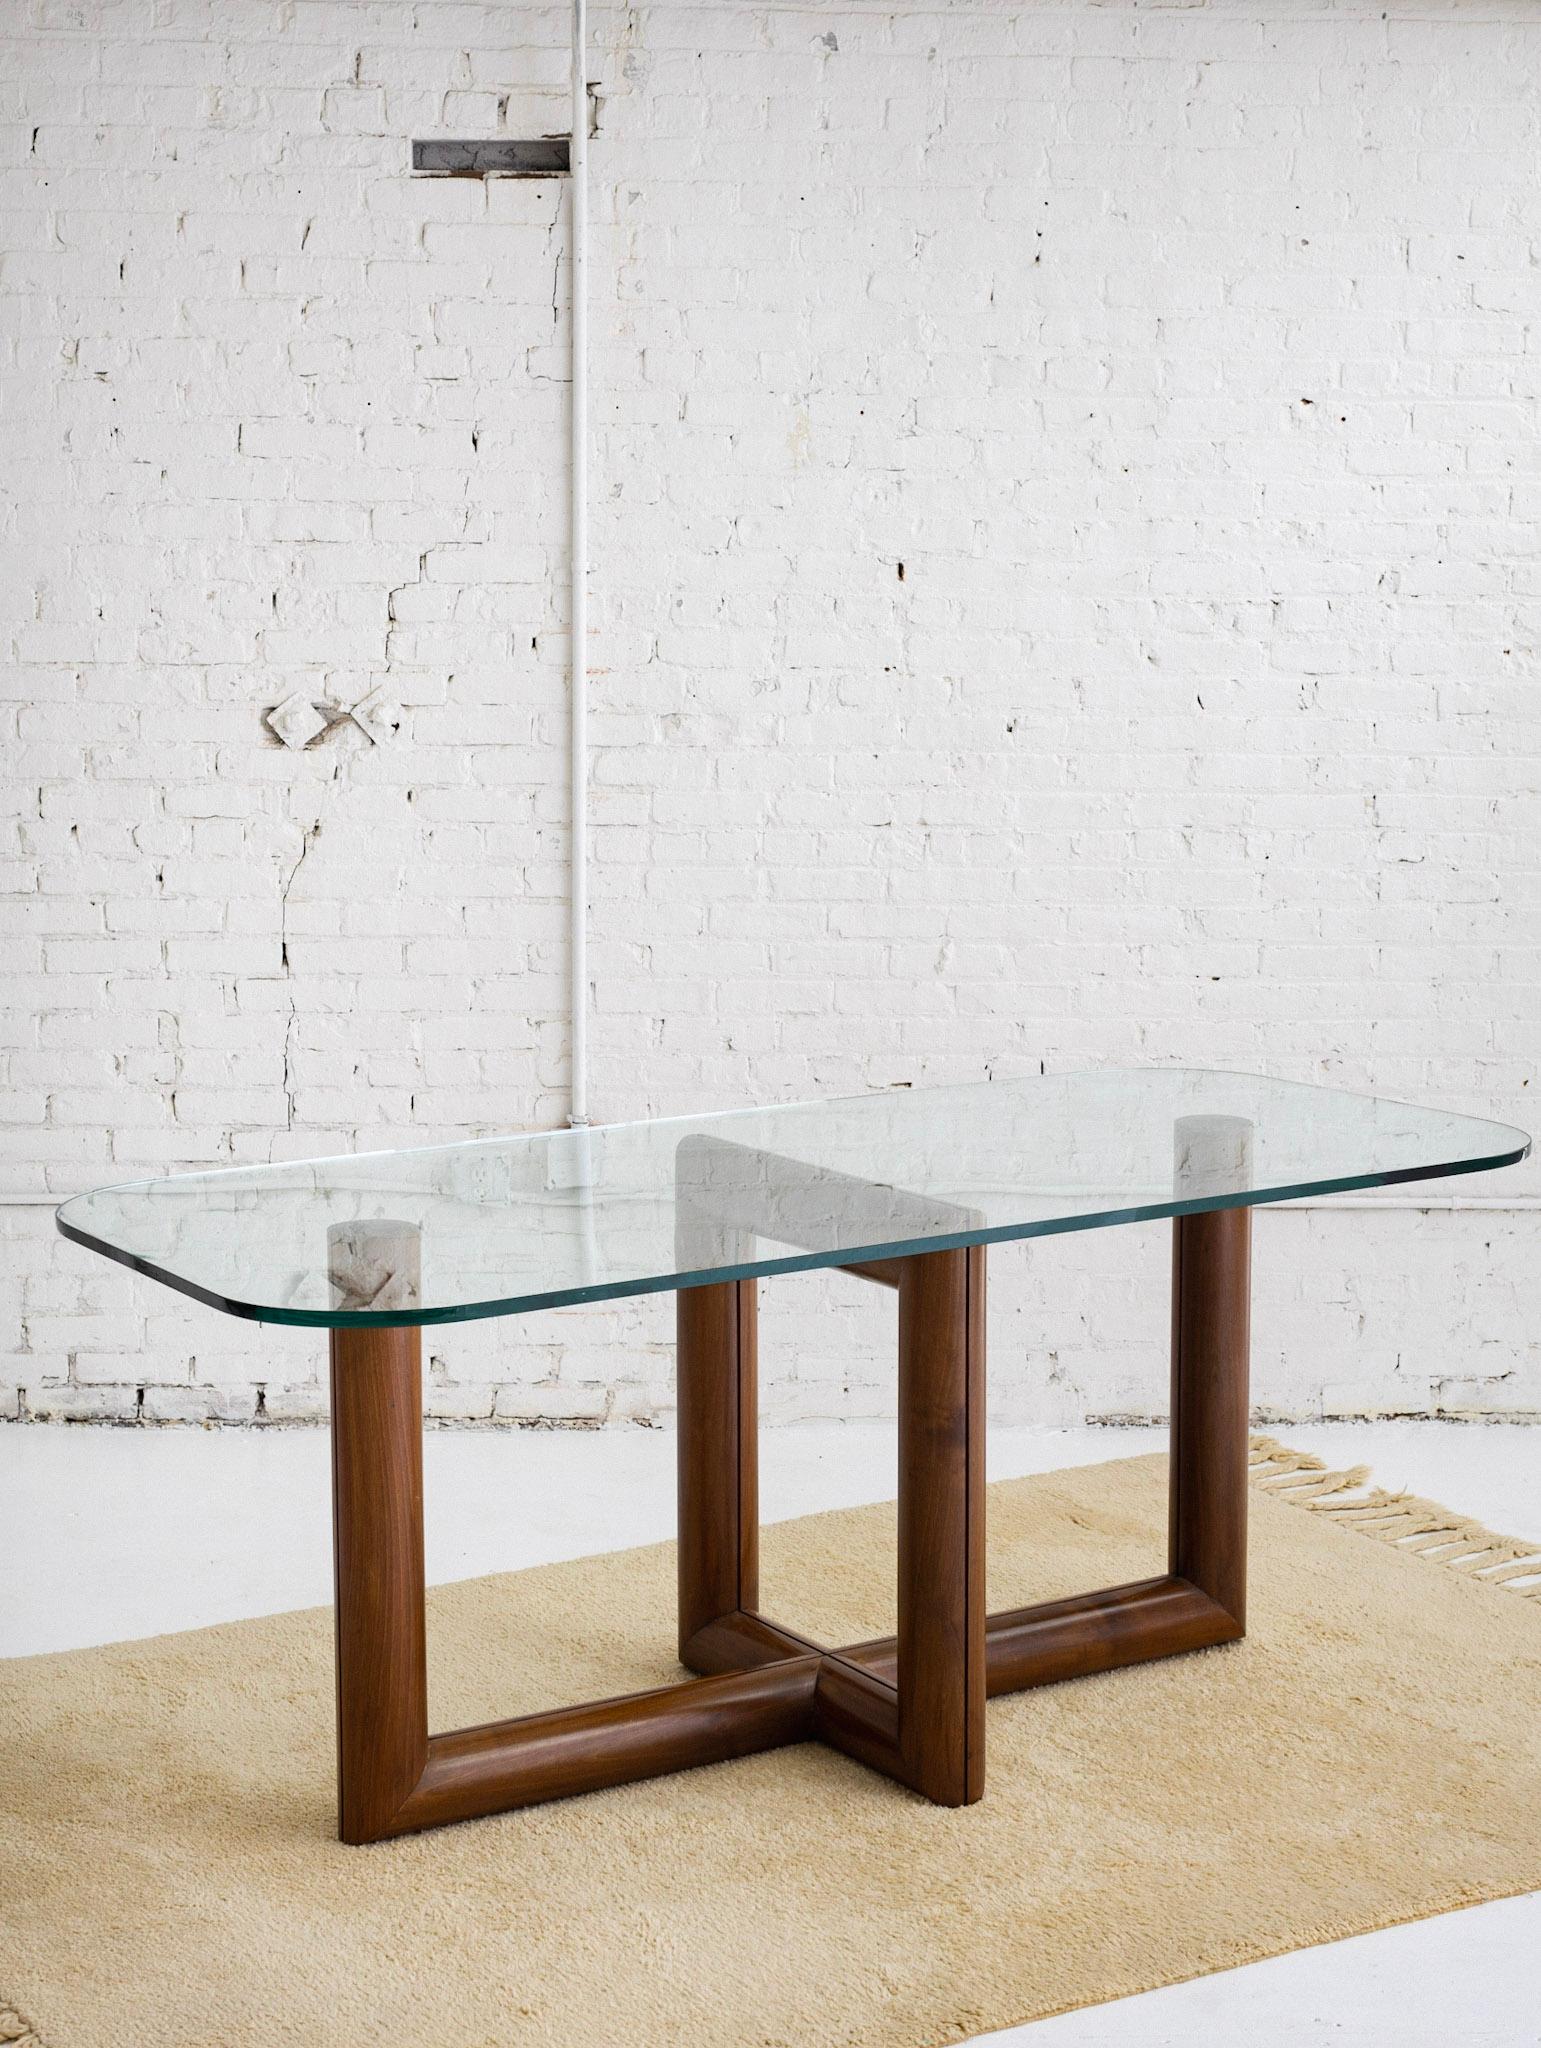 An impressive glass and wood dining table sourced outside of Florence, Italy. Its original owners stated that it was designed custom for the home by the home's architect. A solid wood base. Tubular form with a sculpted architectural silhouette.